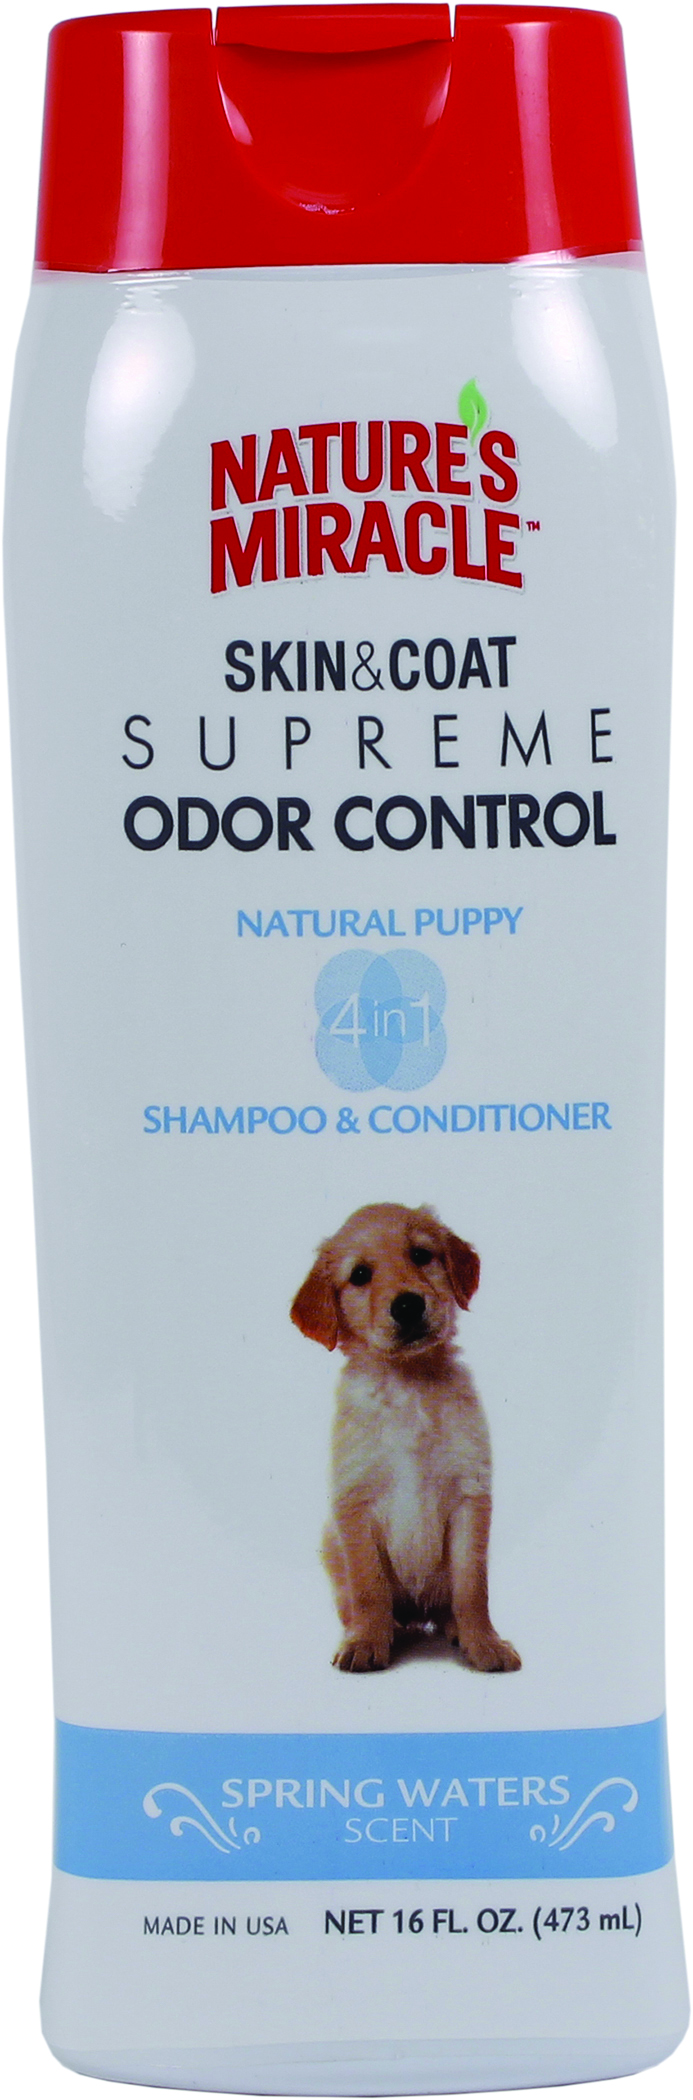 NATURES MIRACLE SUPREME ODOR CONTROL PUPPY